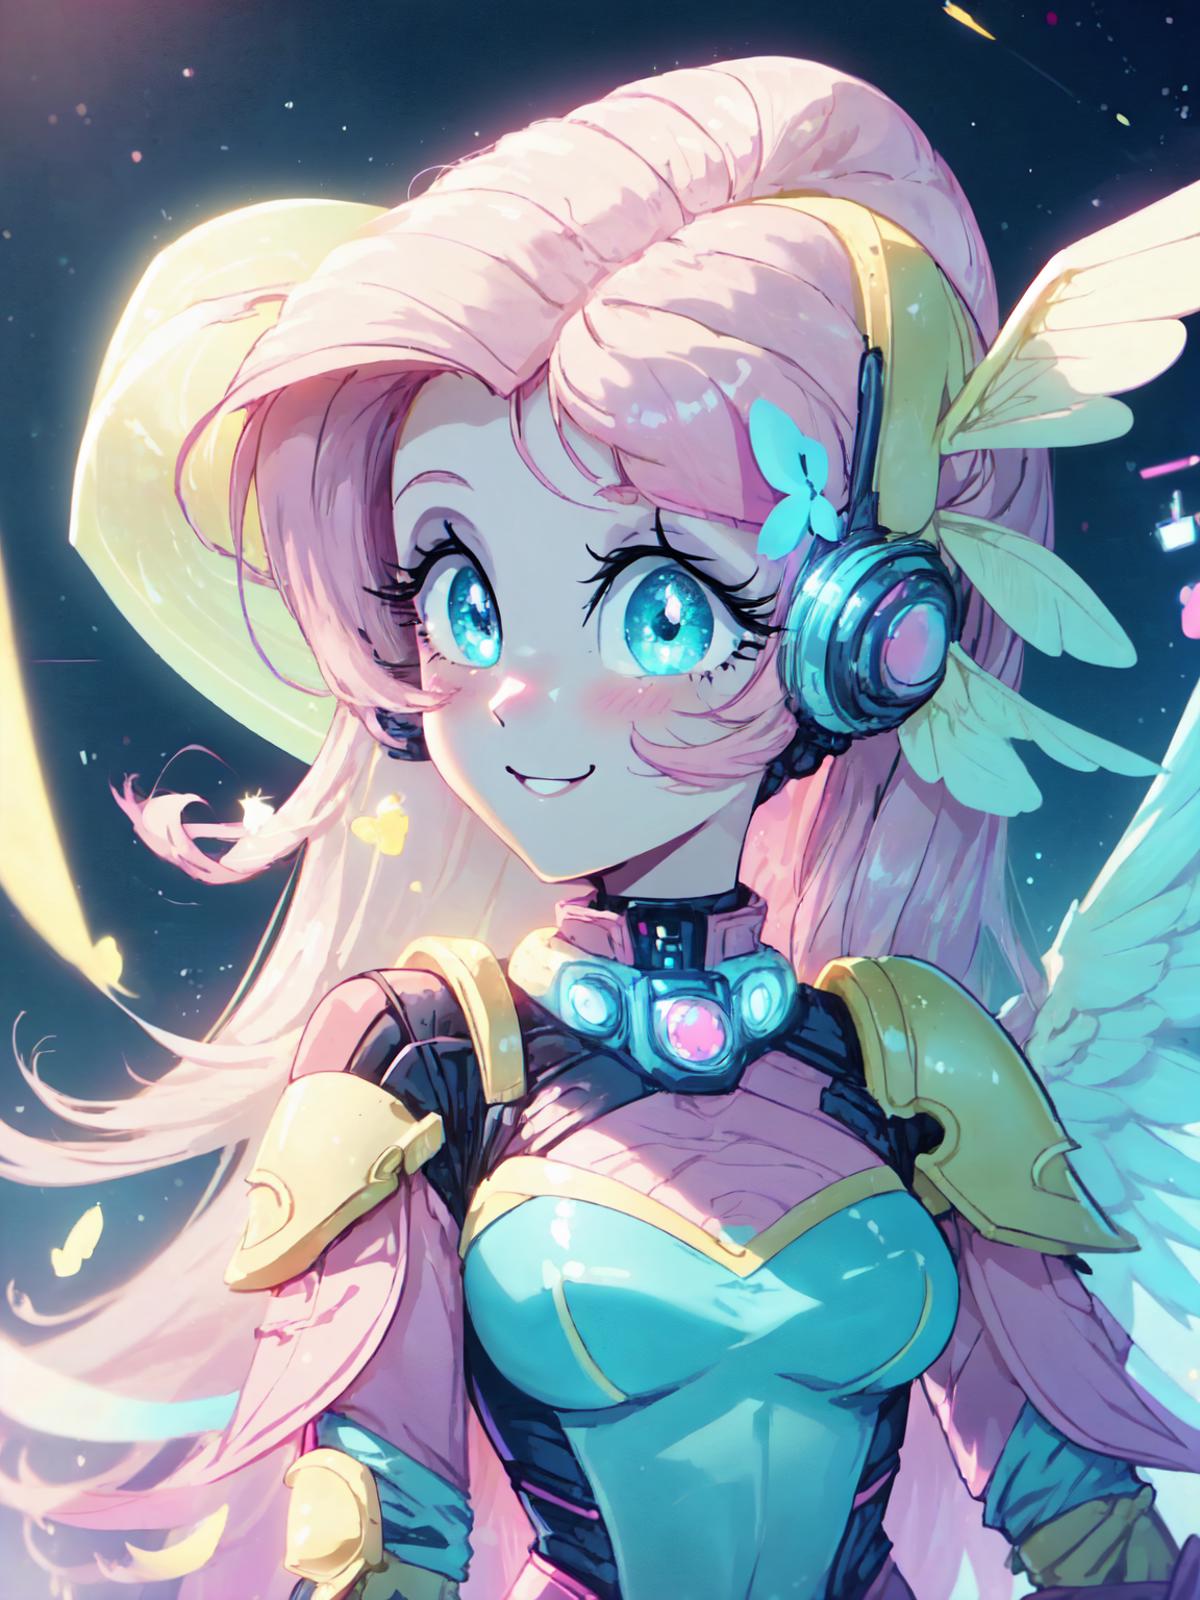 Fluttershy | My Little Pony / Equestria Girls image by neilarmstron12